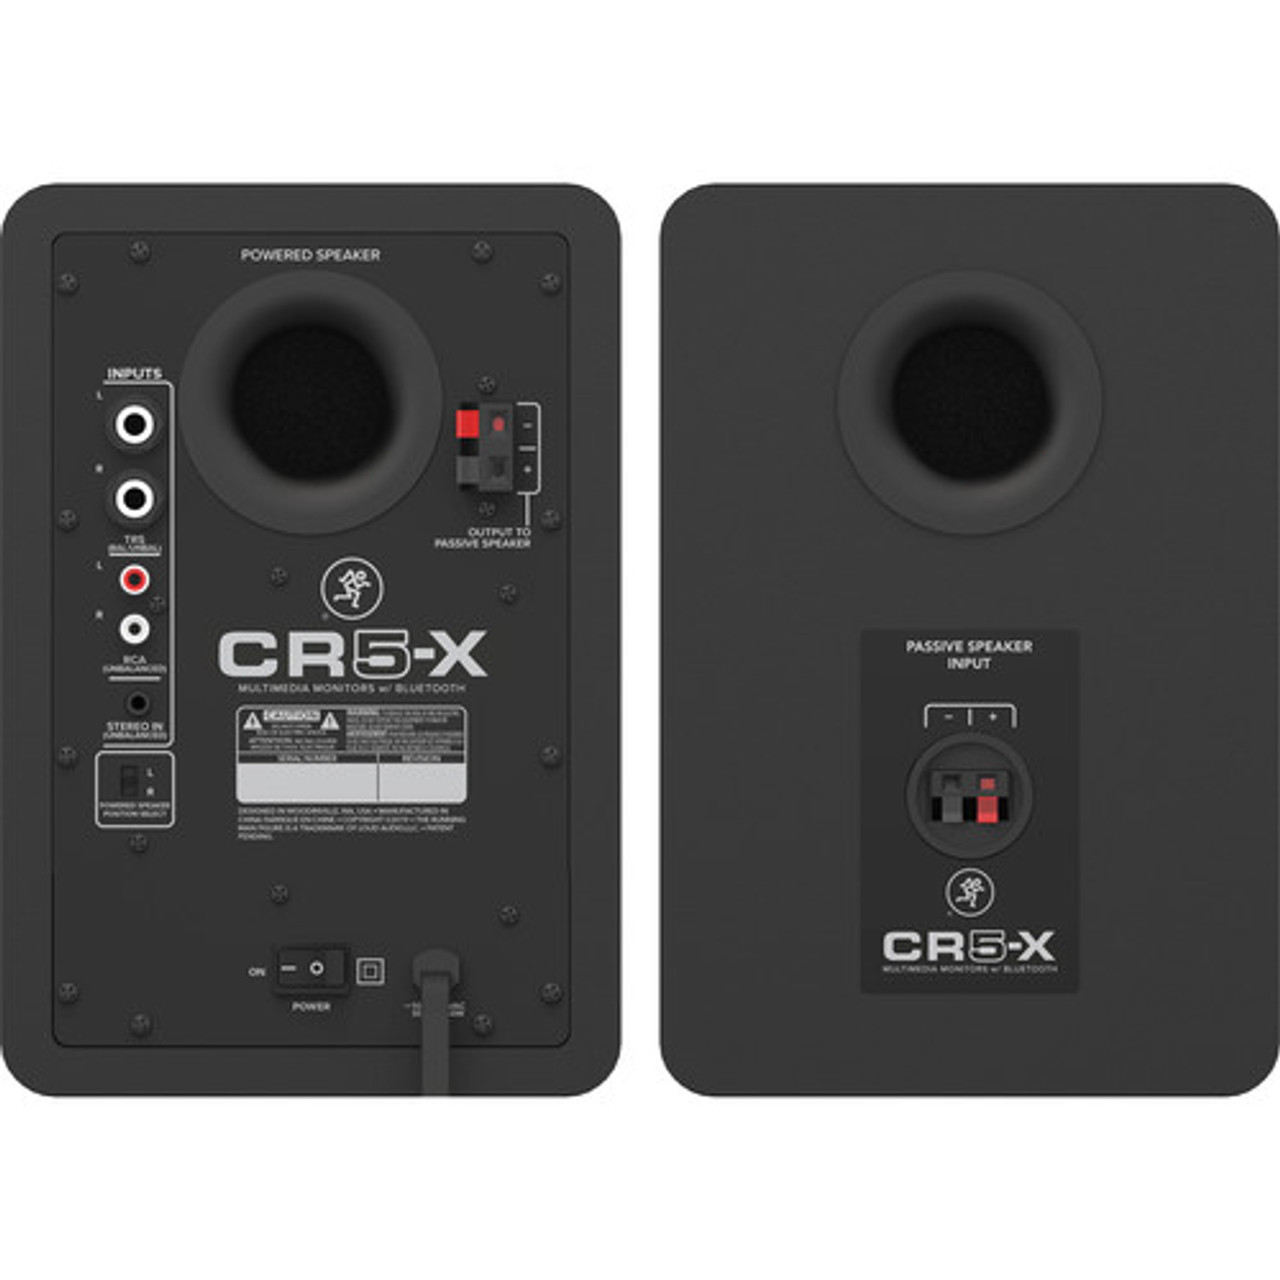 Mackie CR5-X Creative Reference Series 5" Multimedia Monitors (Pair) (CR5-X)